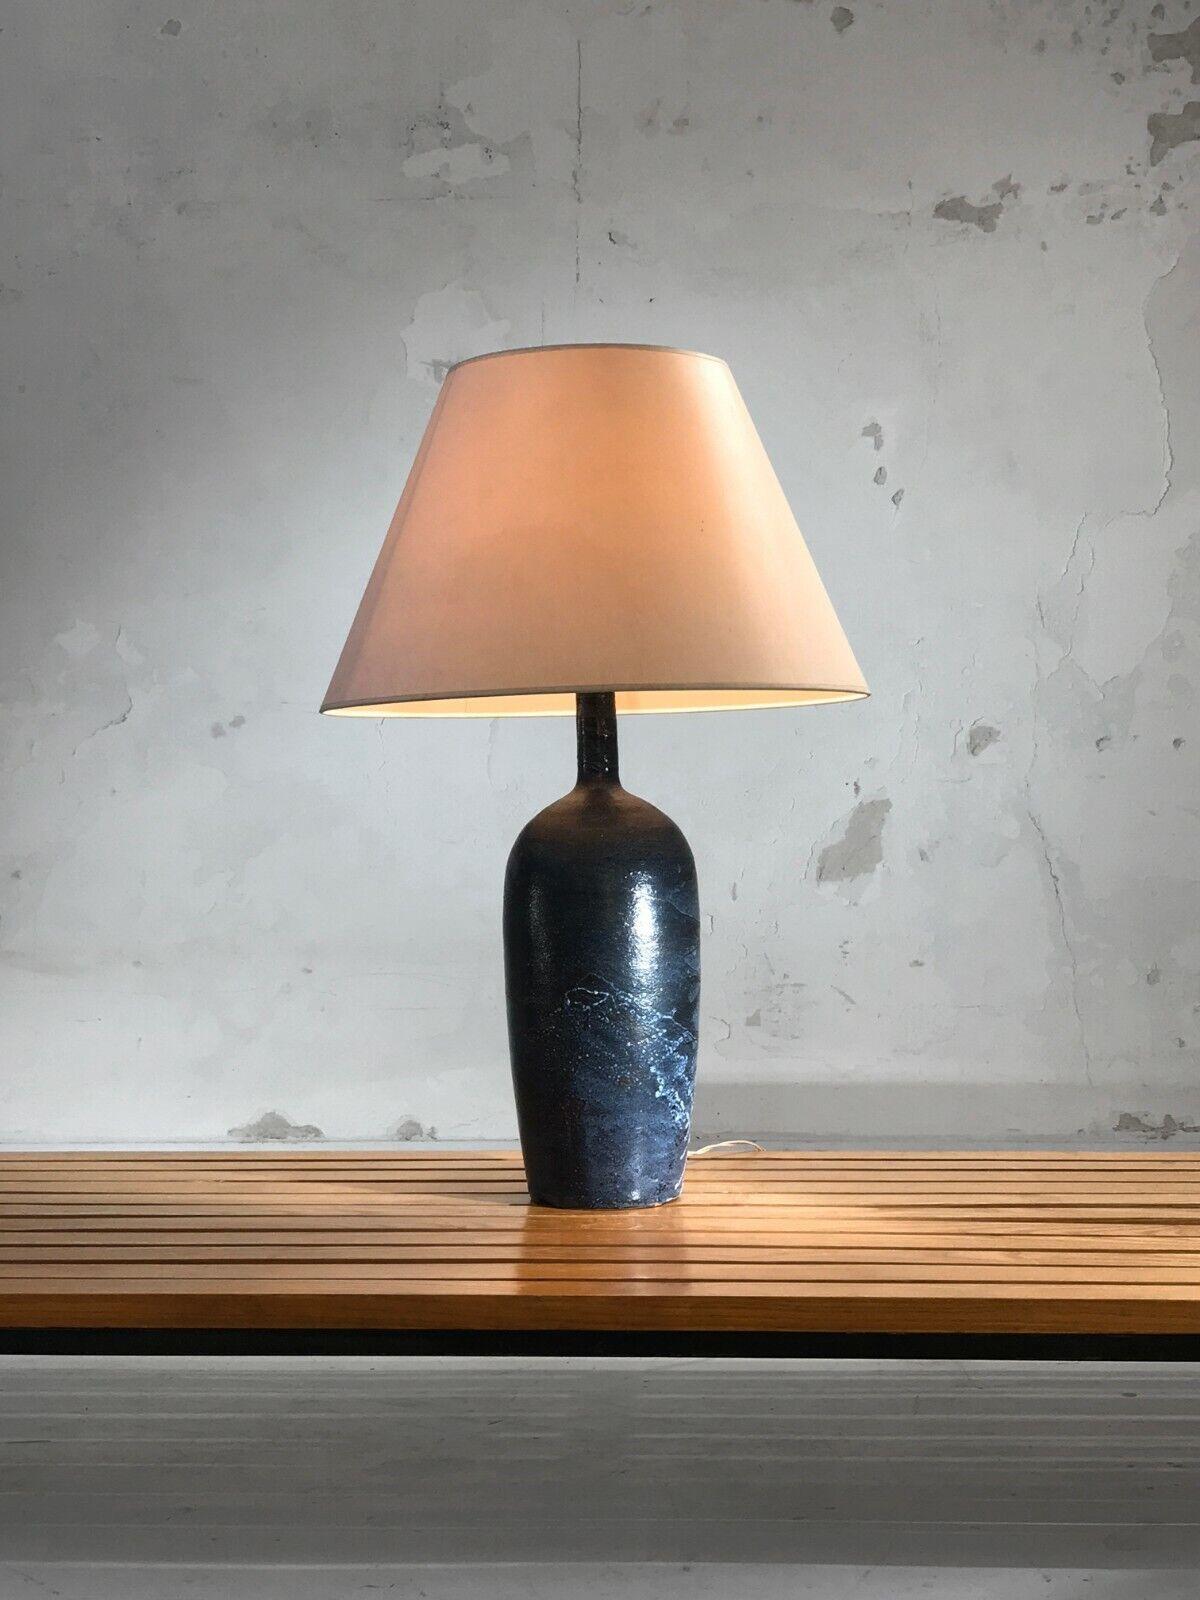 A very large table or floor lamp, Art-Deco, Neo-Classical, Modernist, Bauhaus, Free Form, in thick blue enameled ceramic with very beautiful material effects, to be attributed, France 1950-1960.

SOLD WITH SIMILAR LAMPSHADE...

CONDITION: In